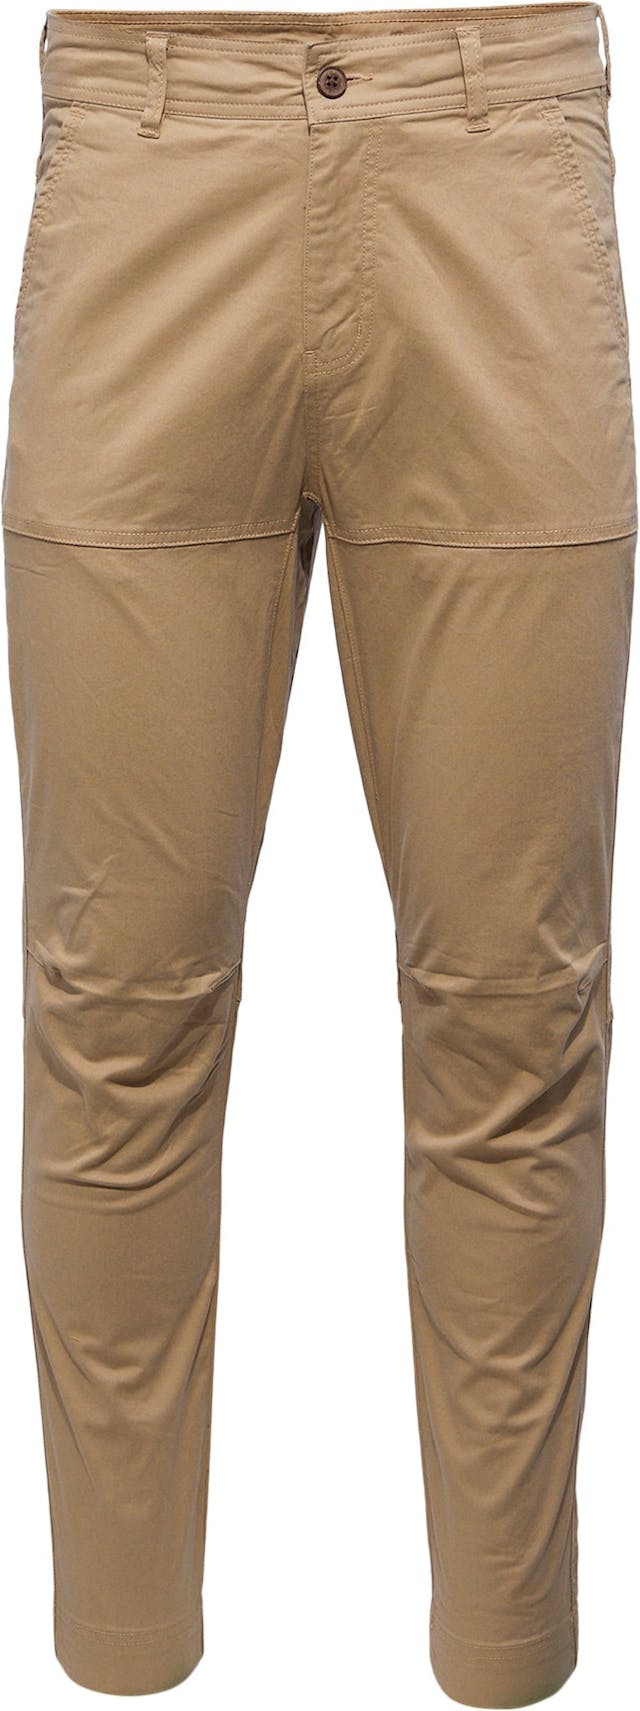 Product image for Stretch Twill Everyday Jogger - Men's